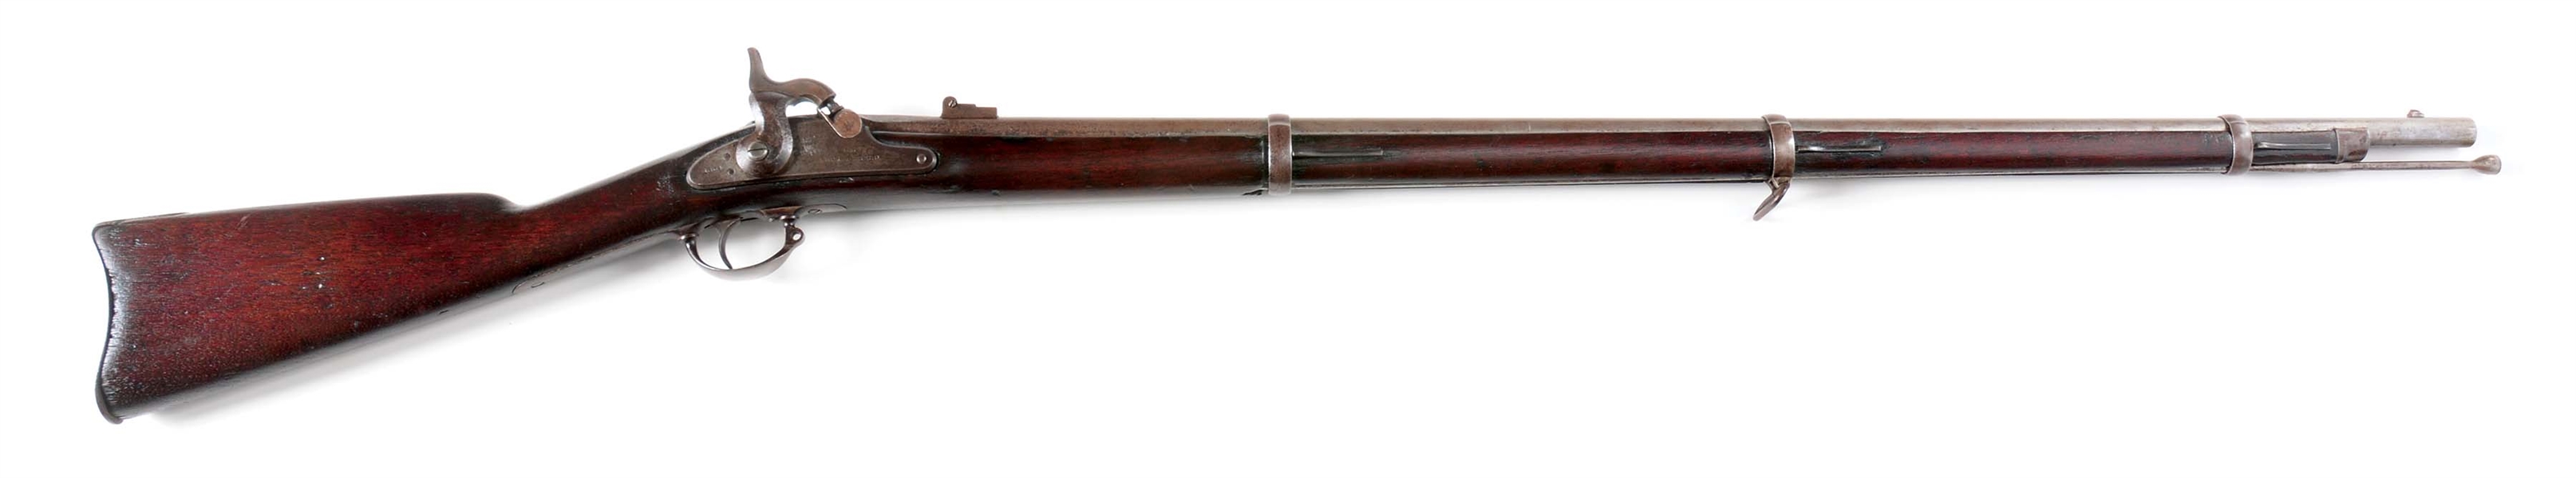 (A) CIVIL WAR SPRINGFIELD MODEL 1863 RIFLED MUSKET, DATED 1864.